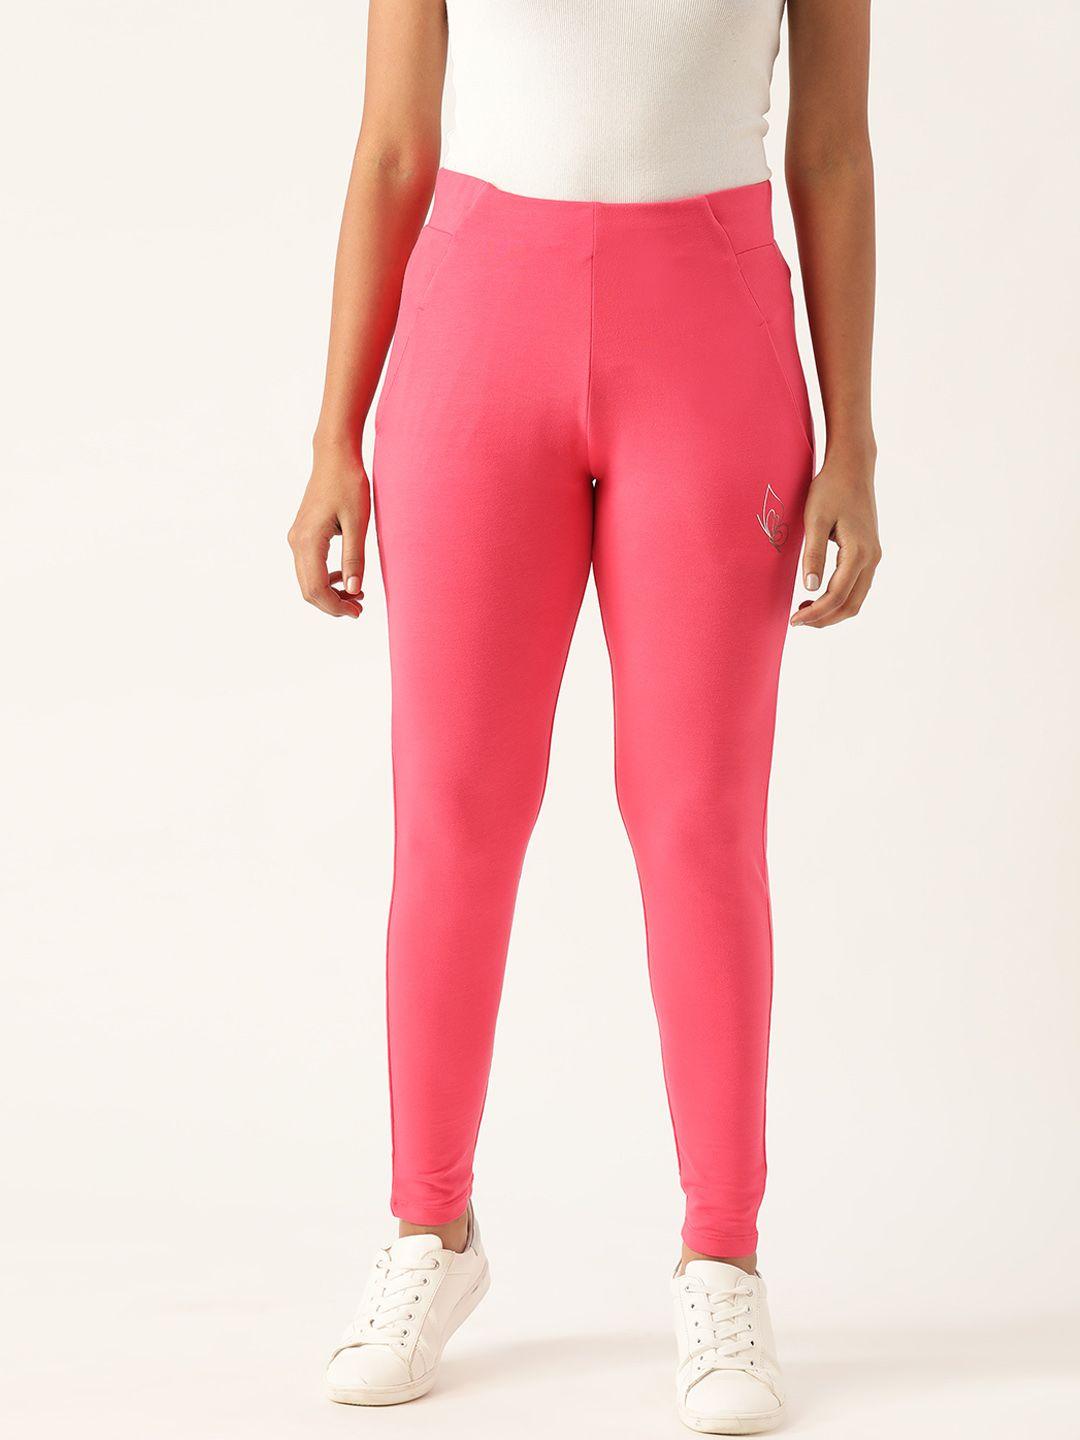 sweet-dreams-women-pink-solid-fitted-training-track-pants